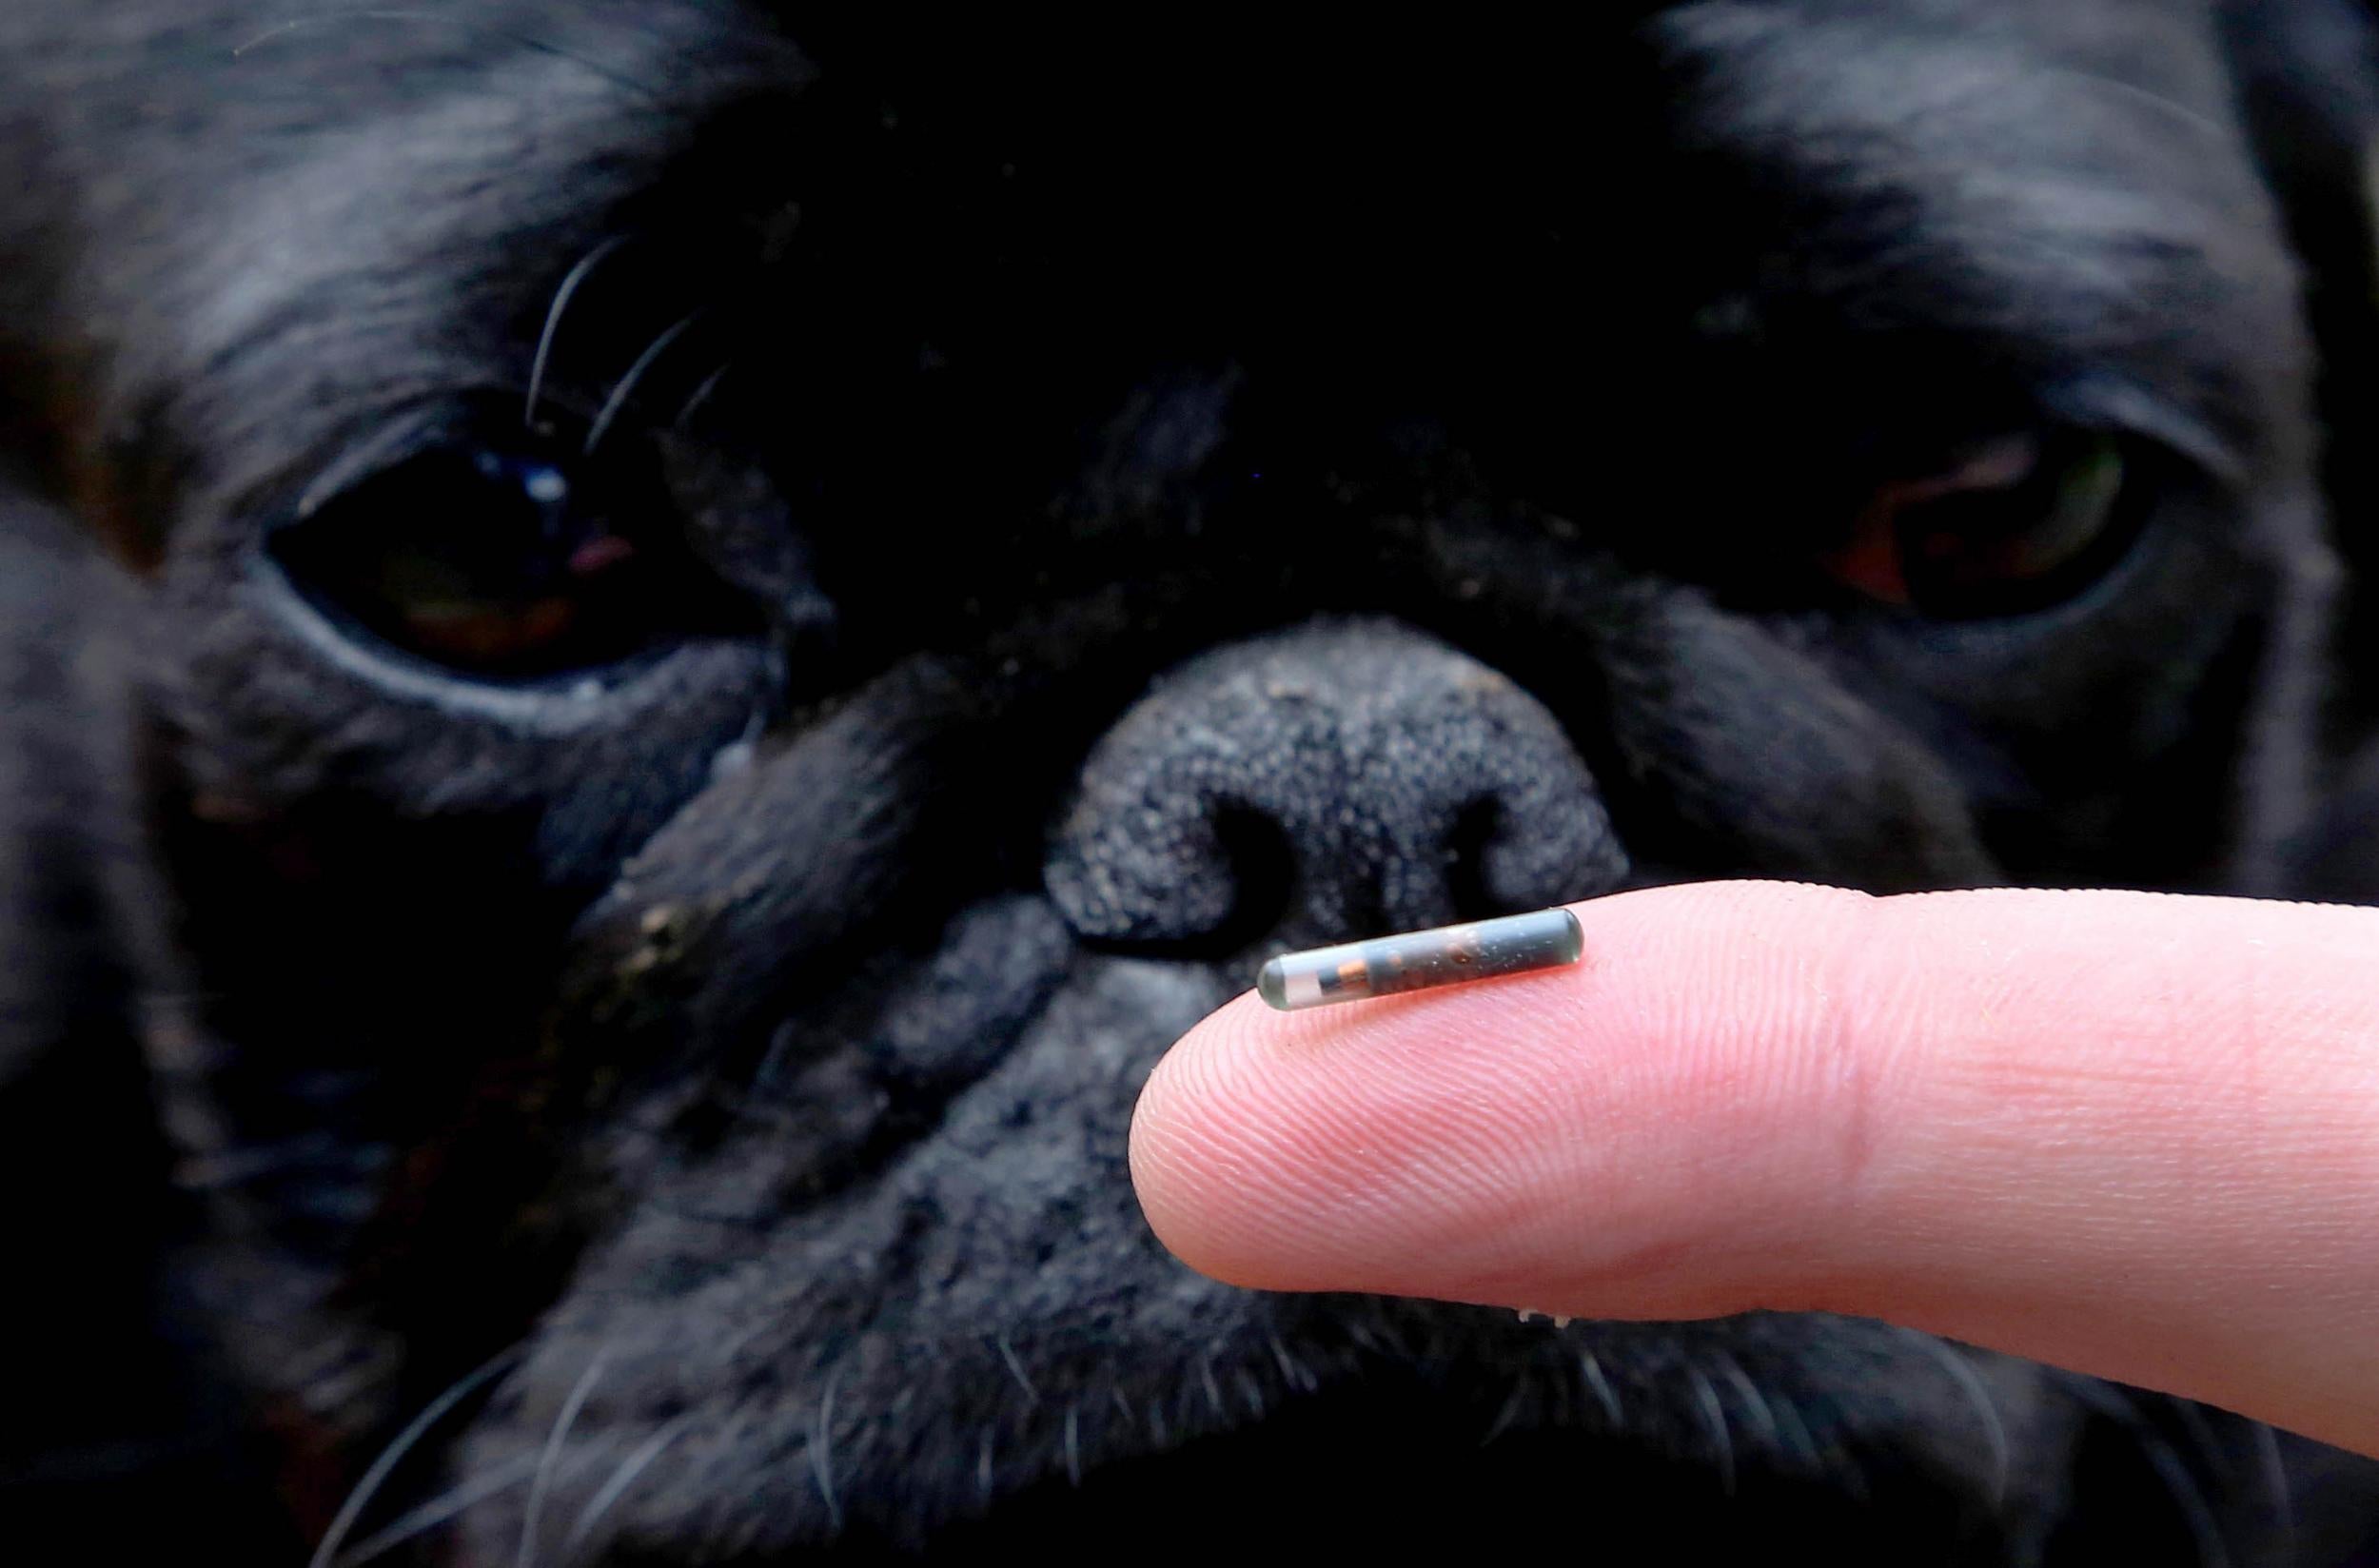 All UK dogs must now be microchipped as new laws come into